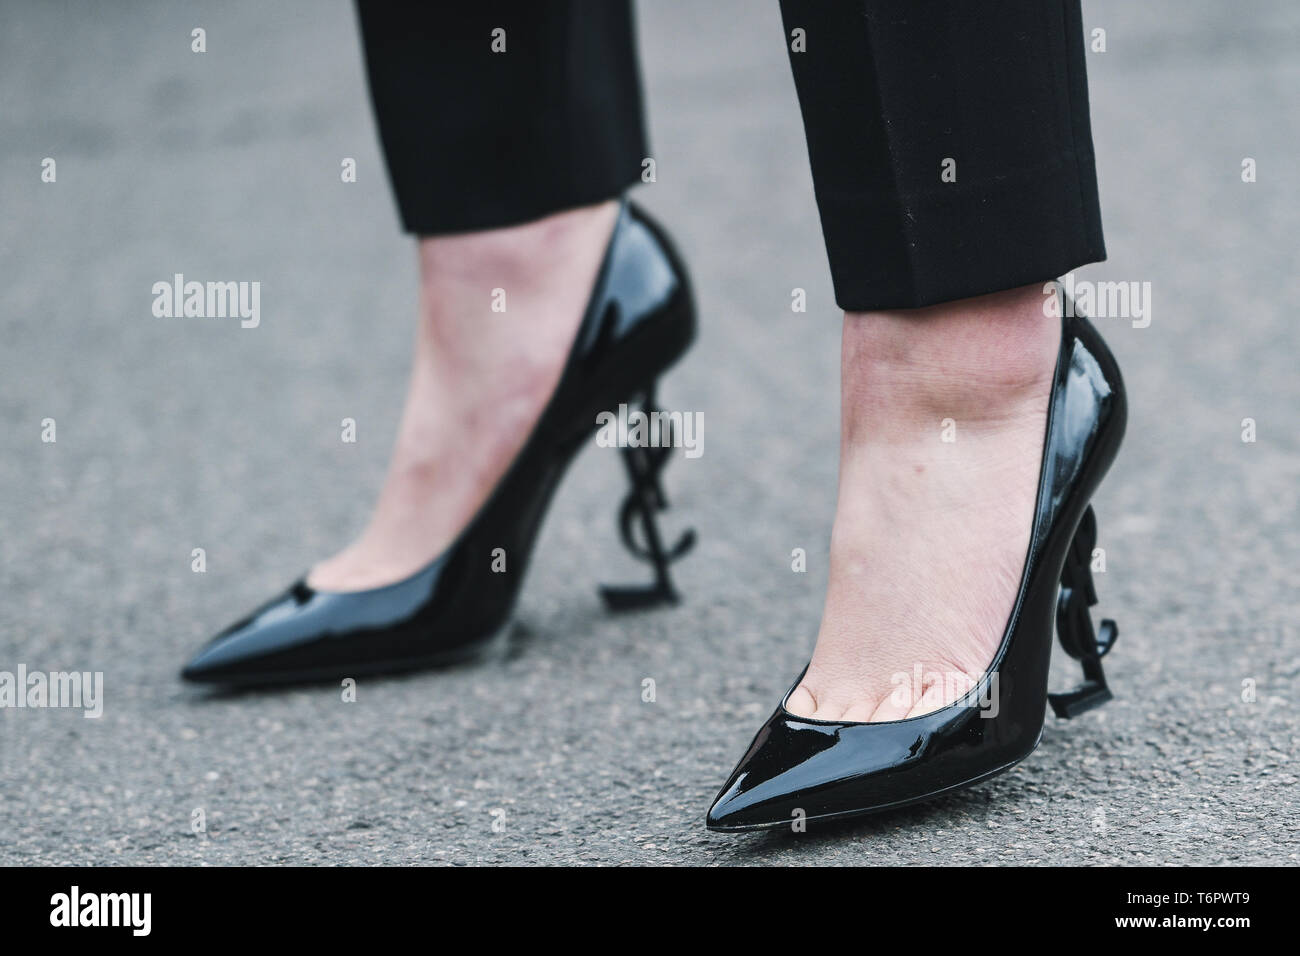 Milan, Italy - February 23, 2019: Street style – Shoes detail after a fashion show during Milan Fashion Week - MFWFW19 Stock Photo